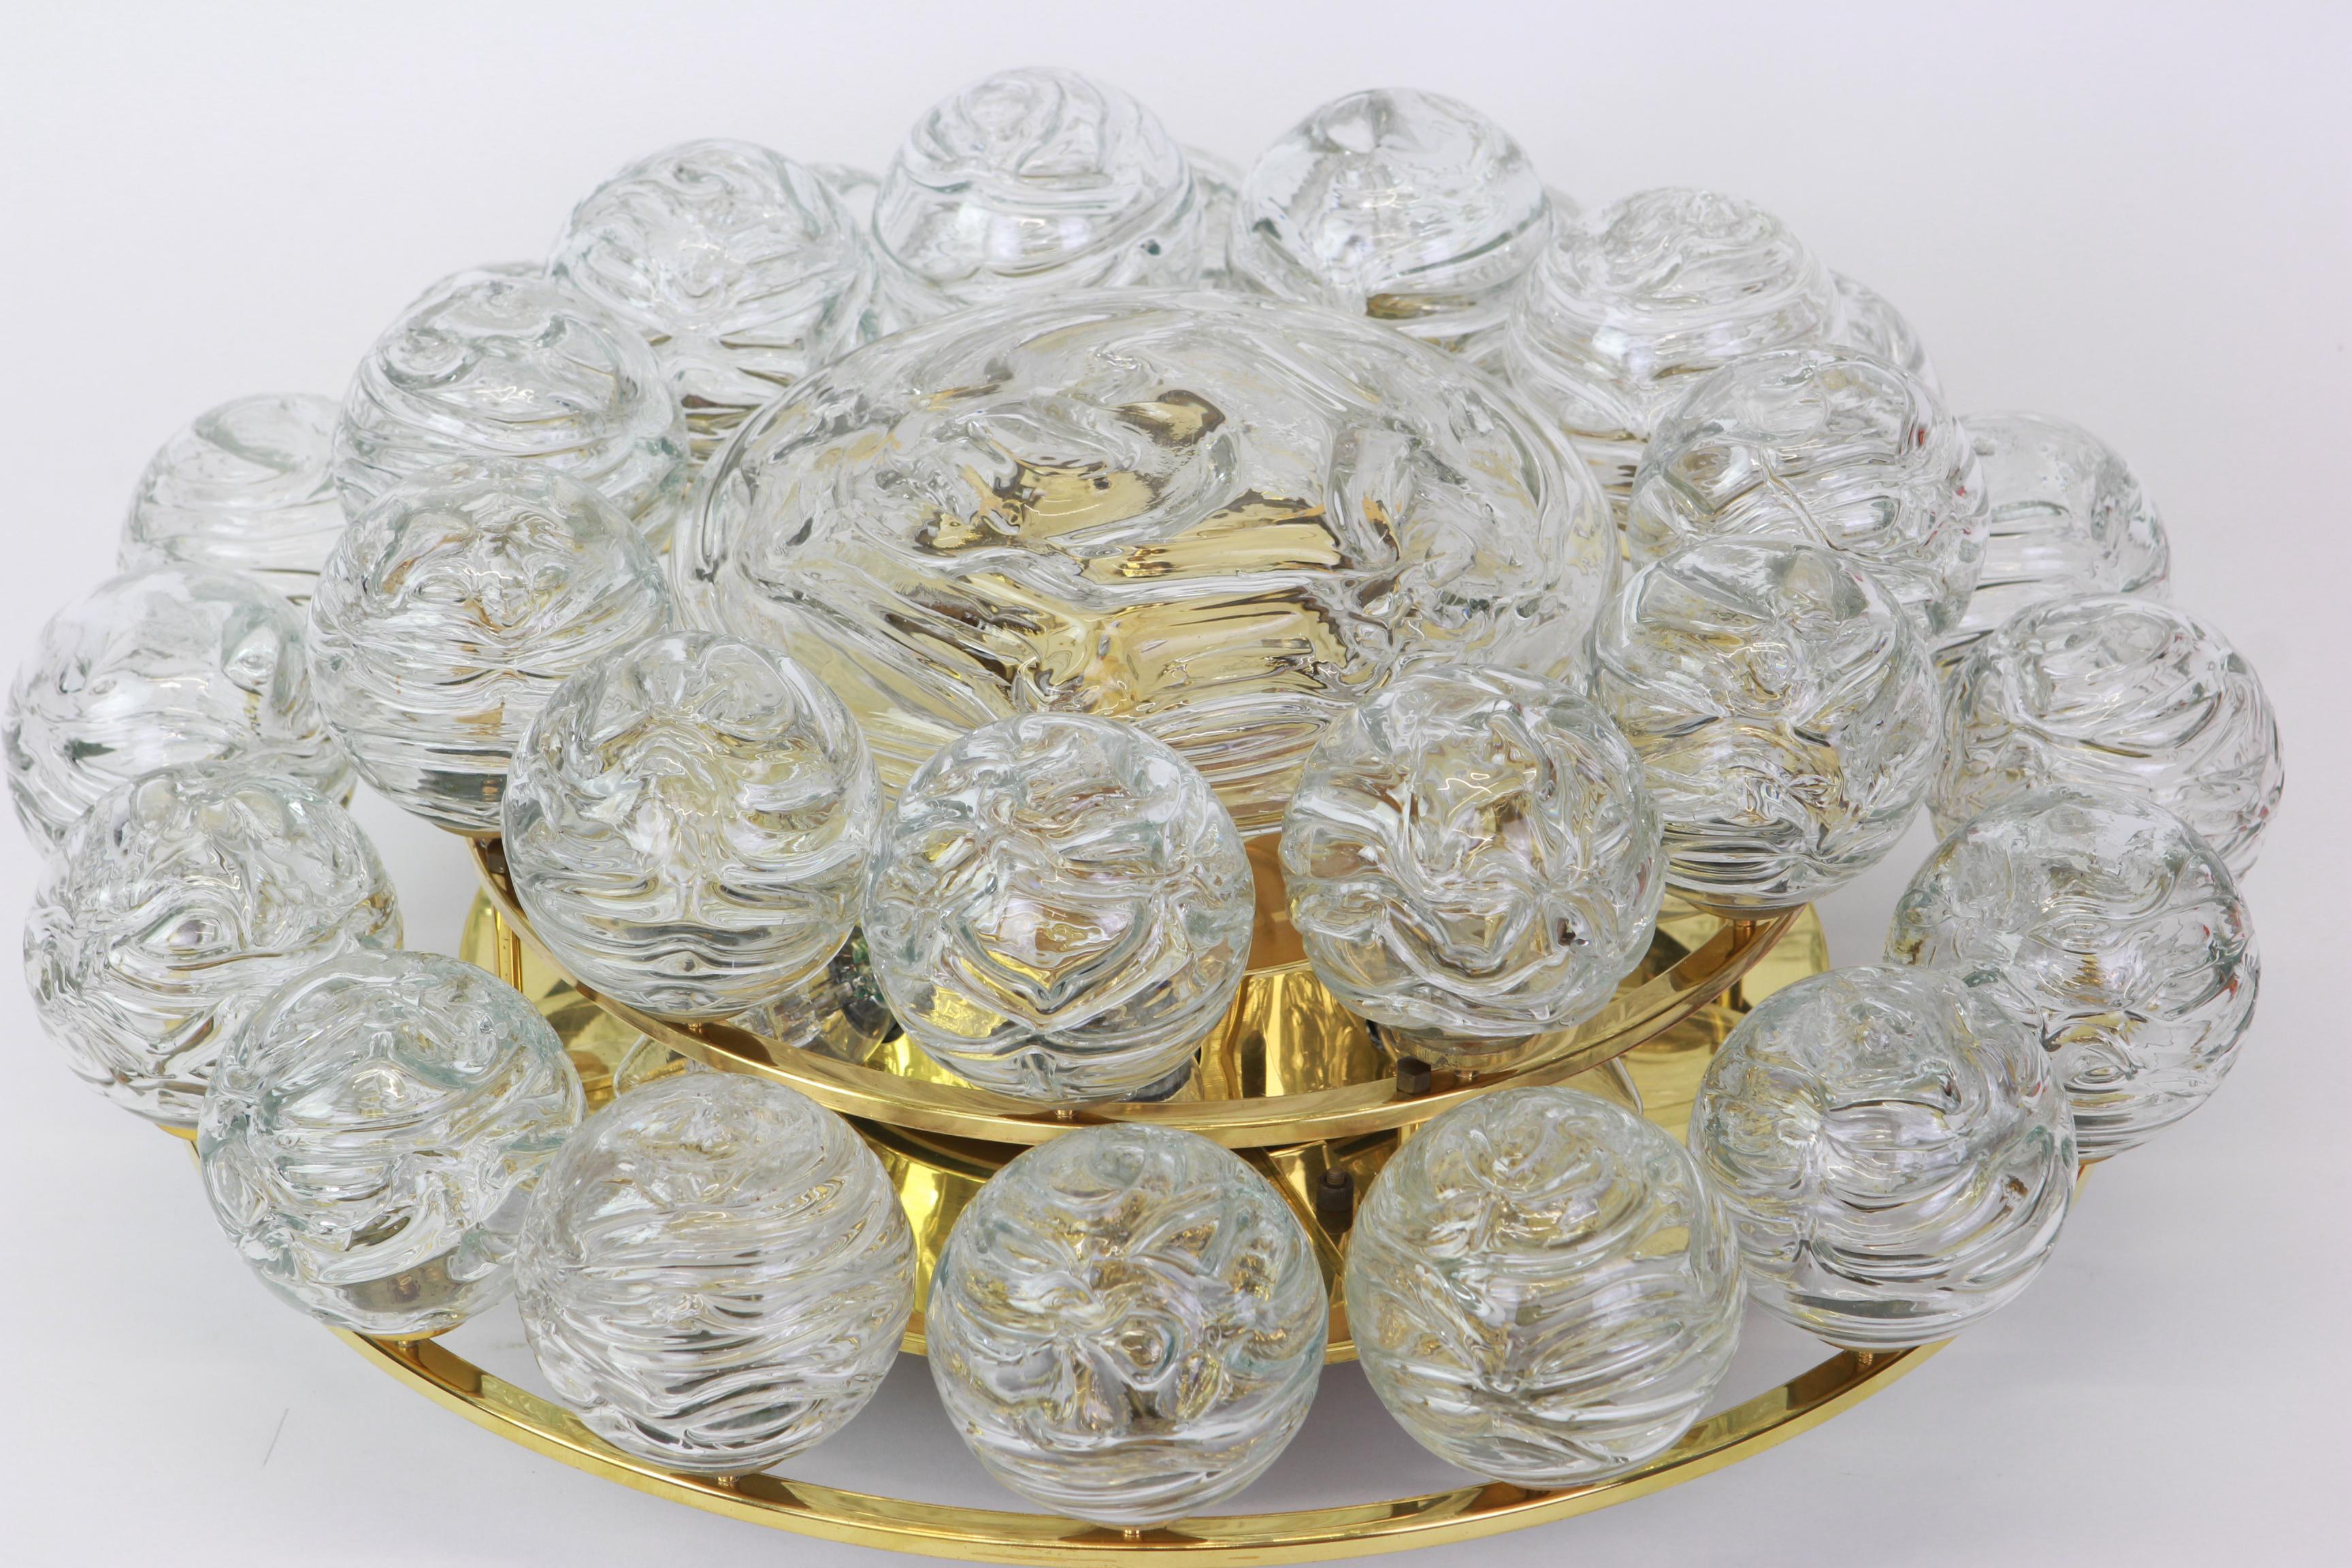 Spectacular Sputnik flushmount with Murano glass snowballs designed by Doria, Germany, 1970s
All Murano glass balls are in very good condition.

Heavy quality and in very good condition. Cleaned, well-wired and ready to use.
It requires 8 x E14